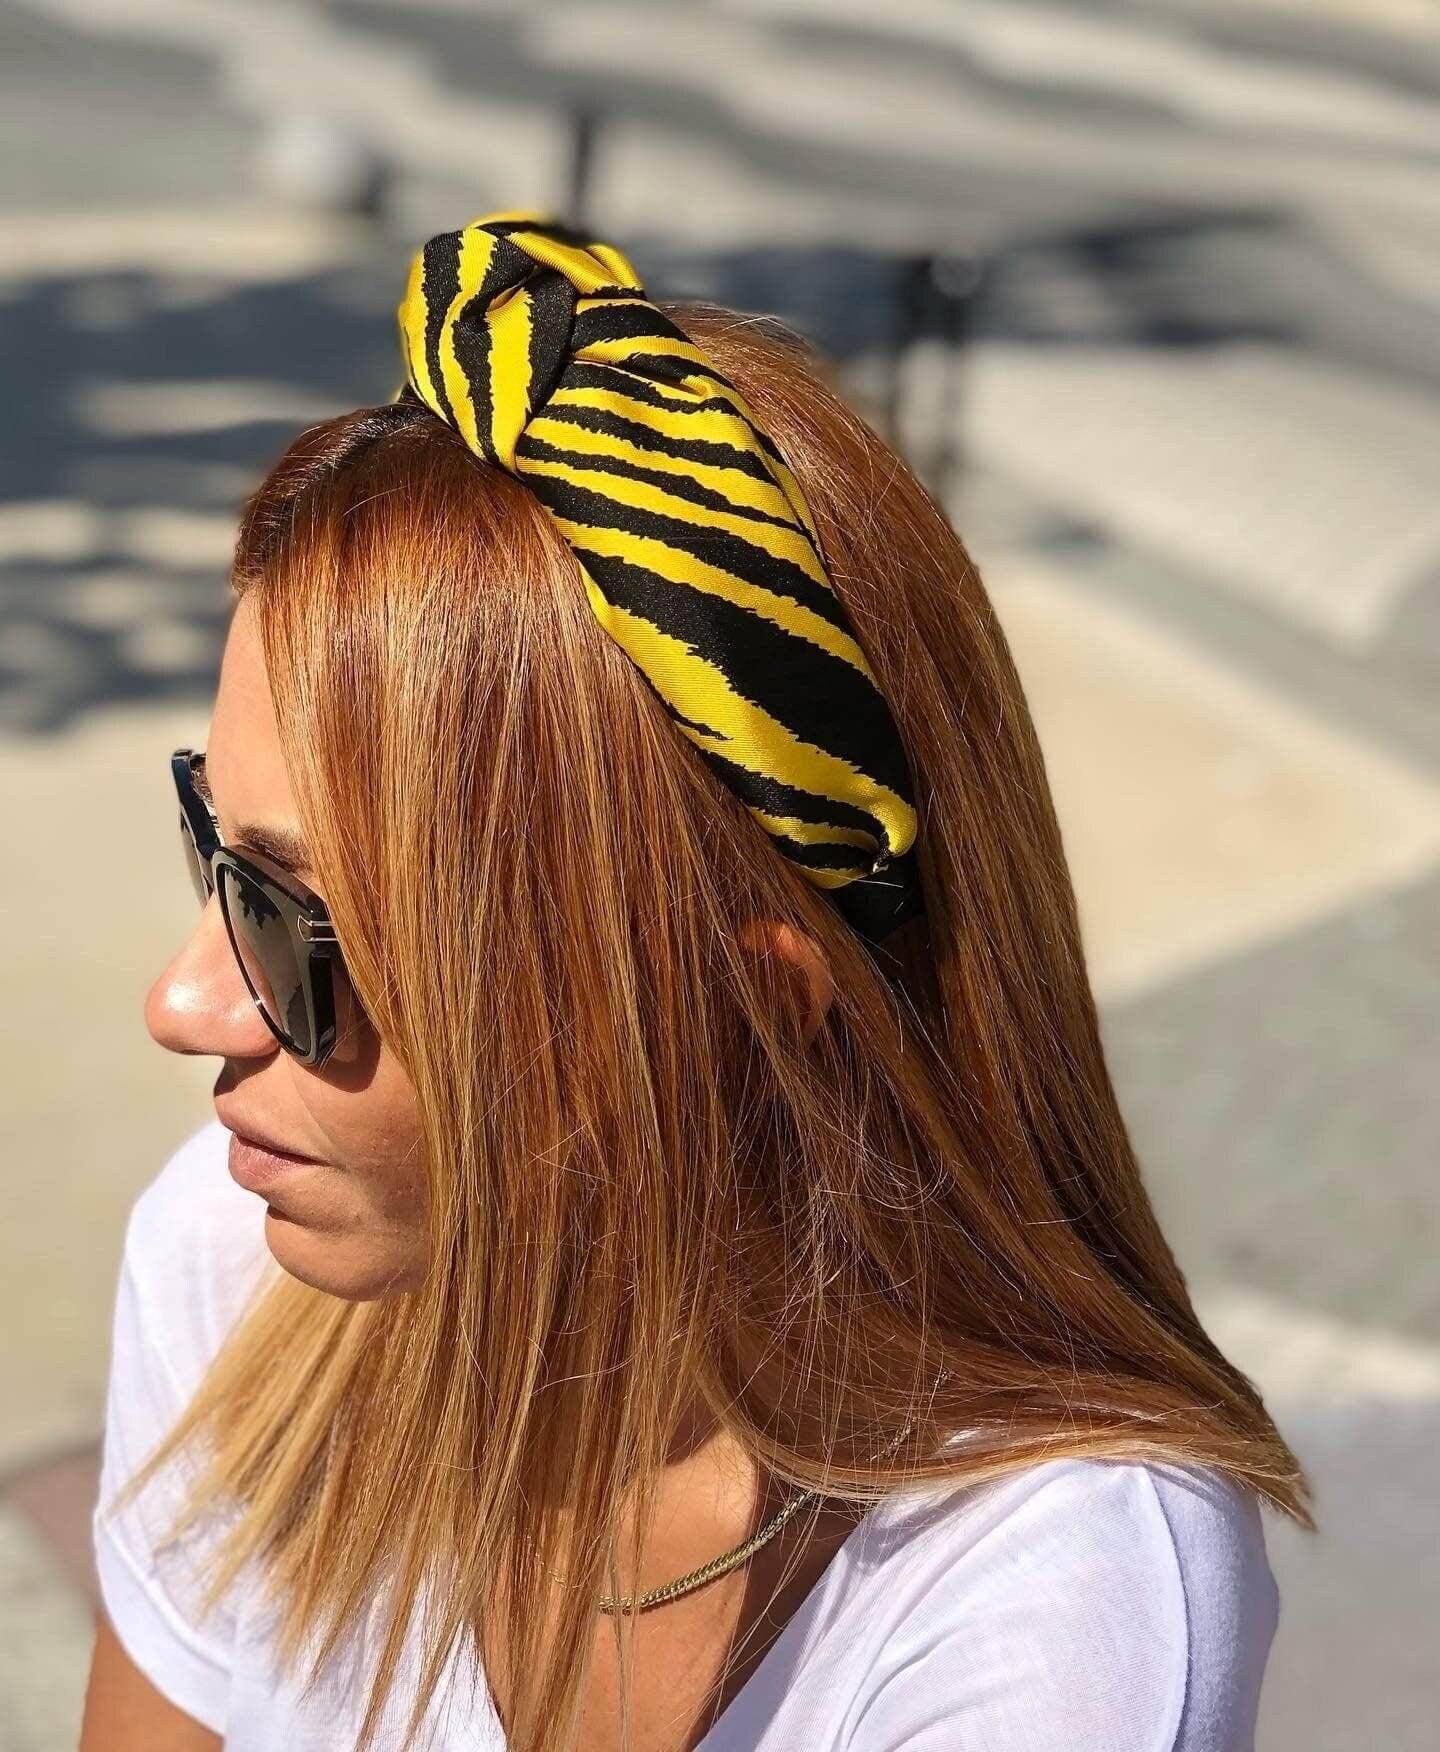 Premium Stylish Knotted Zebra Pattern Headband in Yellow and Black for Women - Padded Alice Band Perfect for Summer available at Moyoni Design